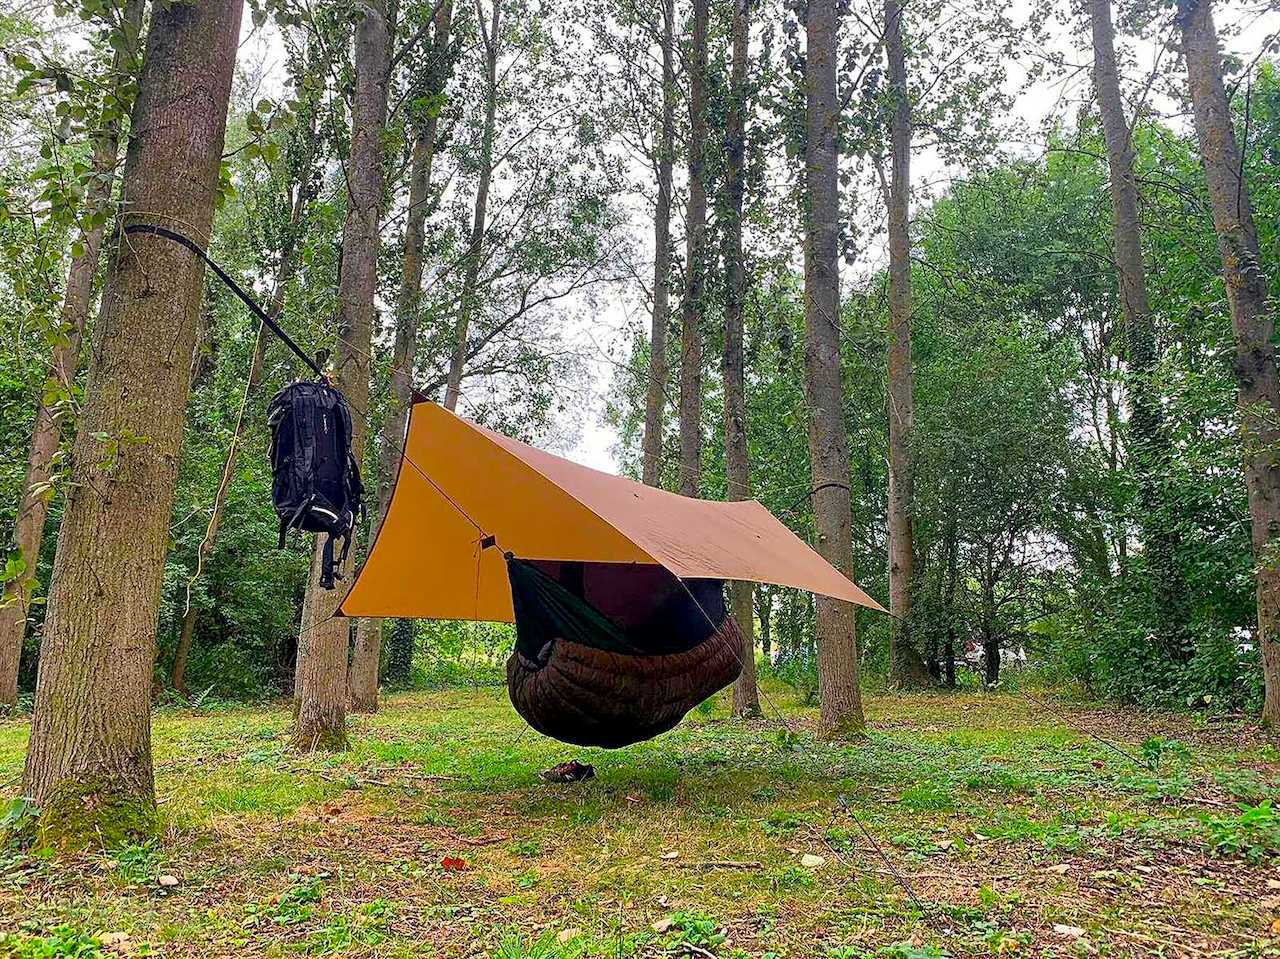 Pitch up among the trees at this campsite in Kent